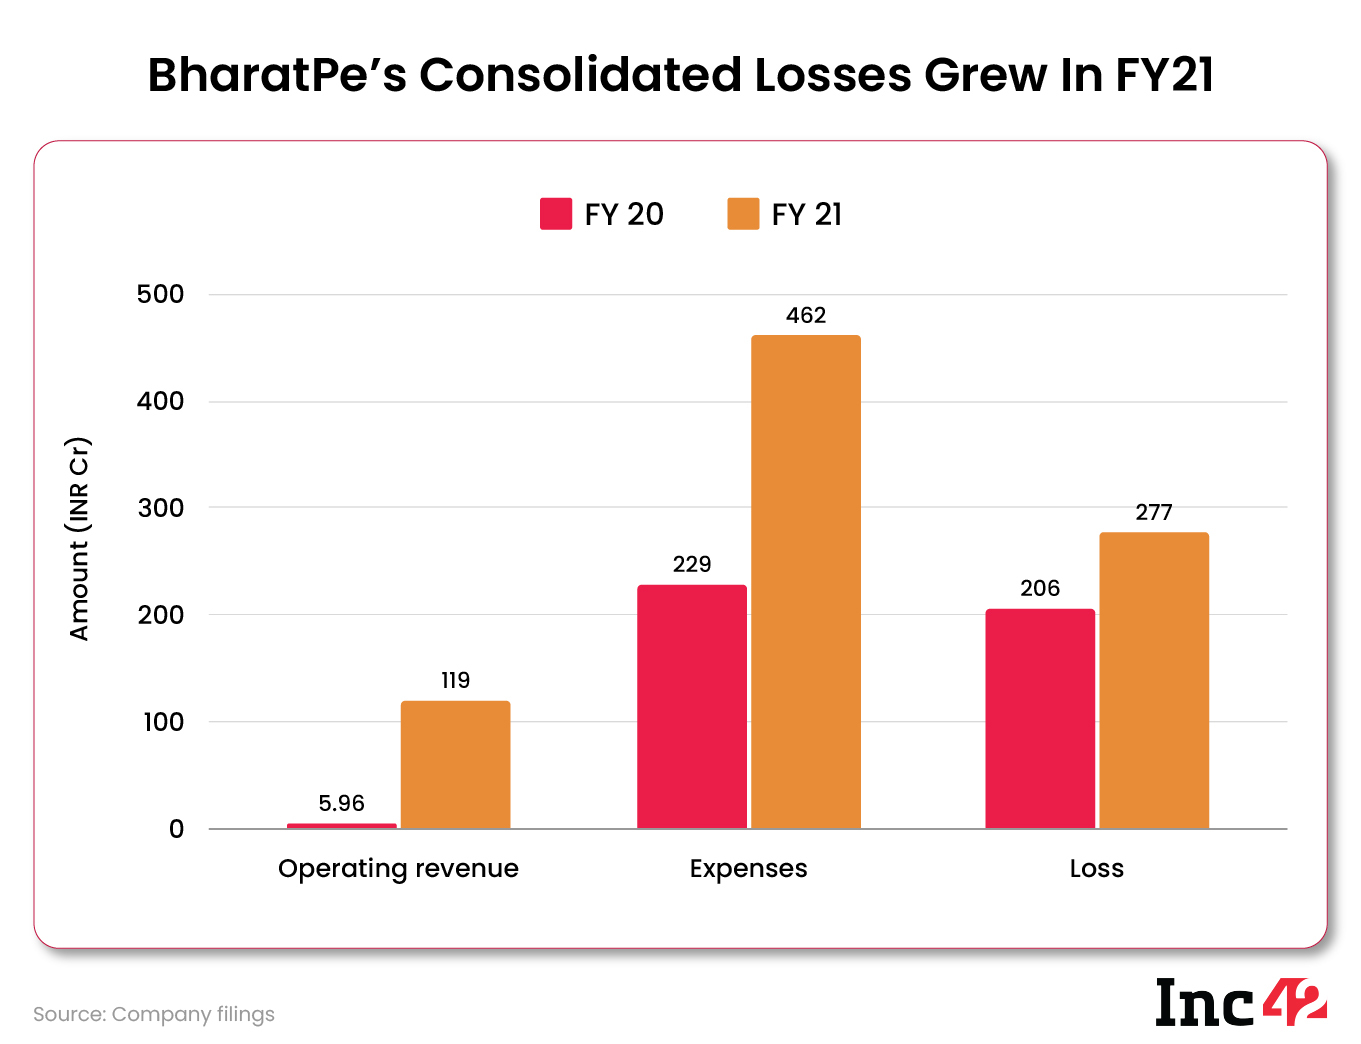 BharatPe's Consolidated Losses Grew In FY21